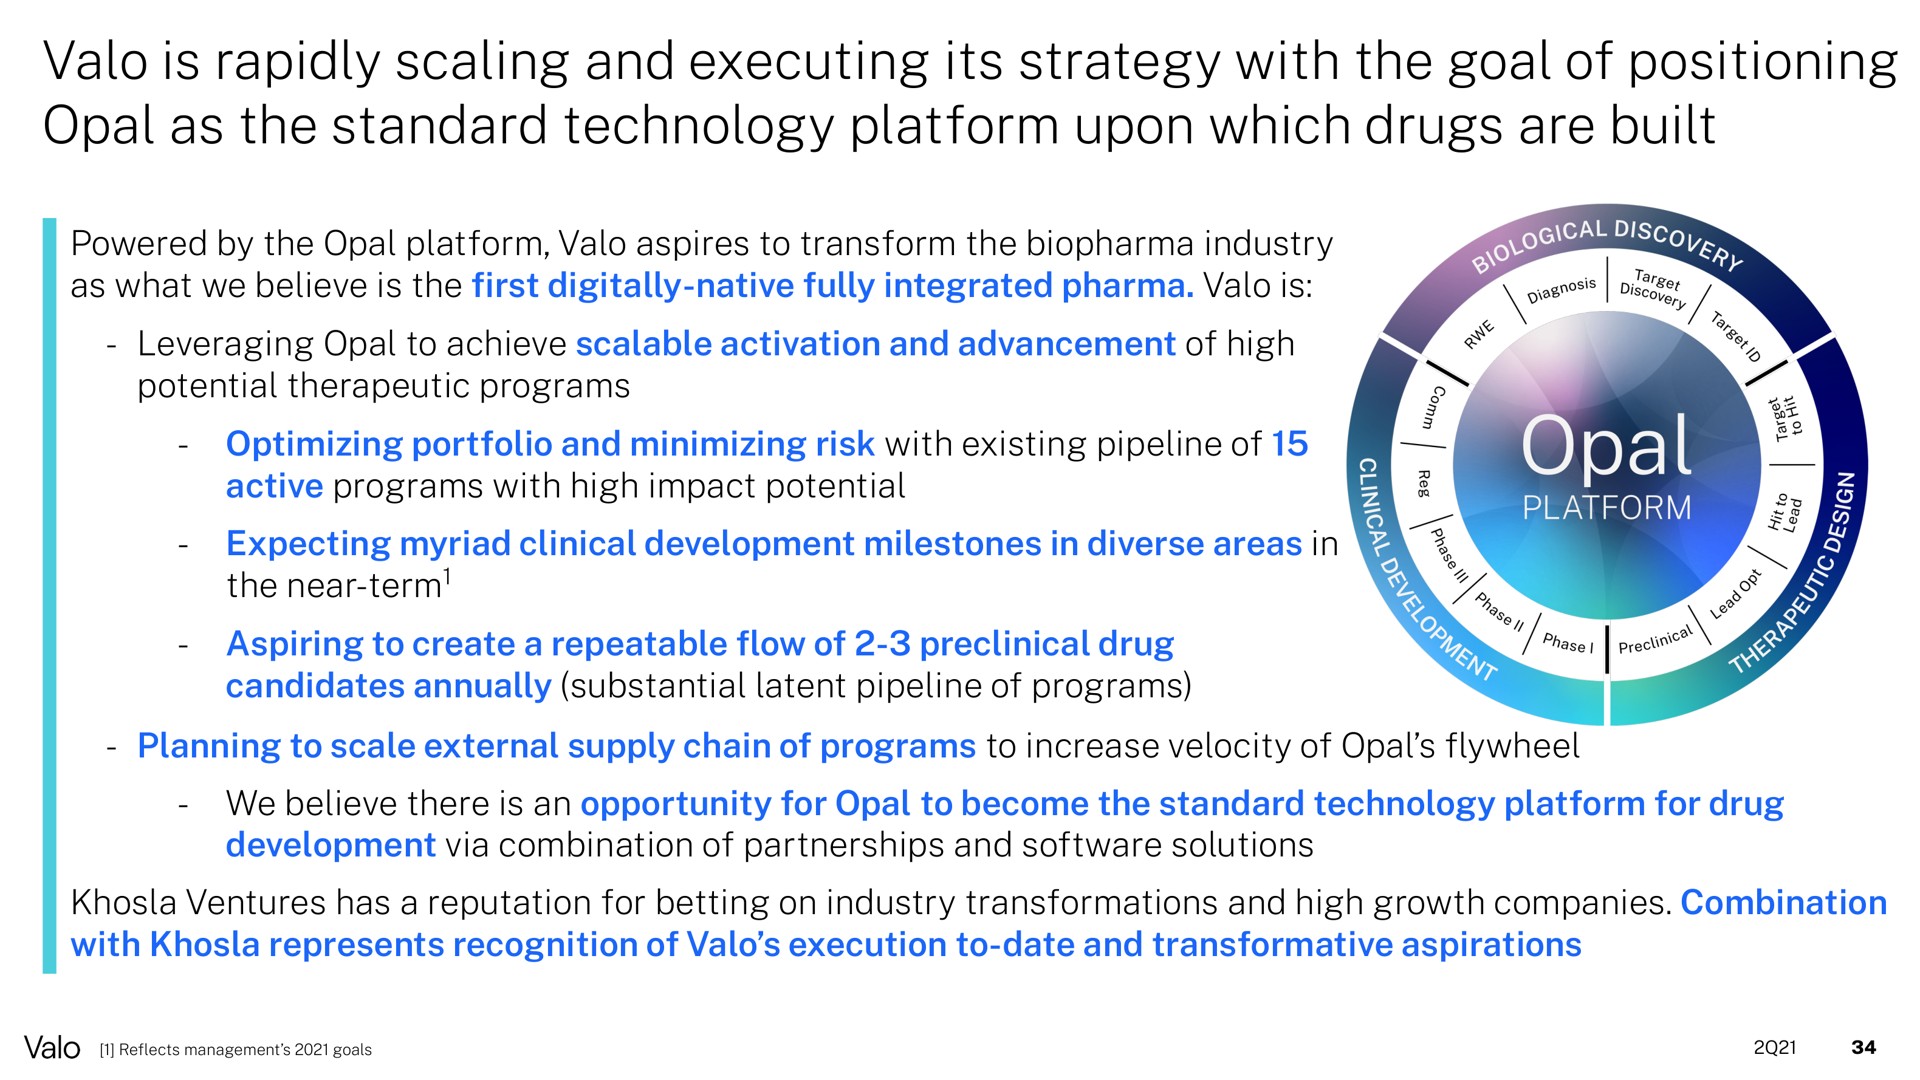 is rapidly scaling and executing its strategy with the goal of positioning opal as the standard technology platform upon which drugs are built | Valo